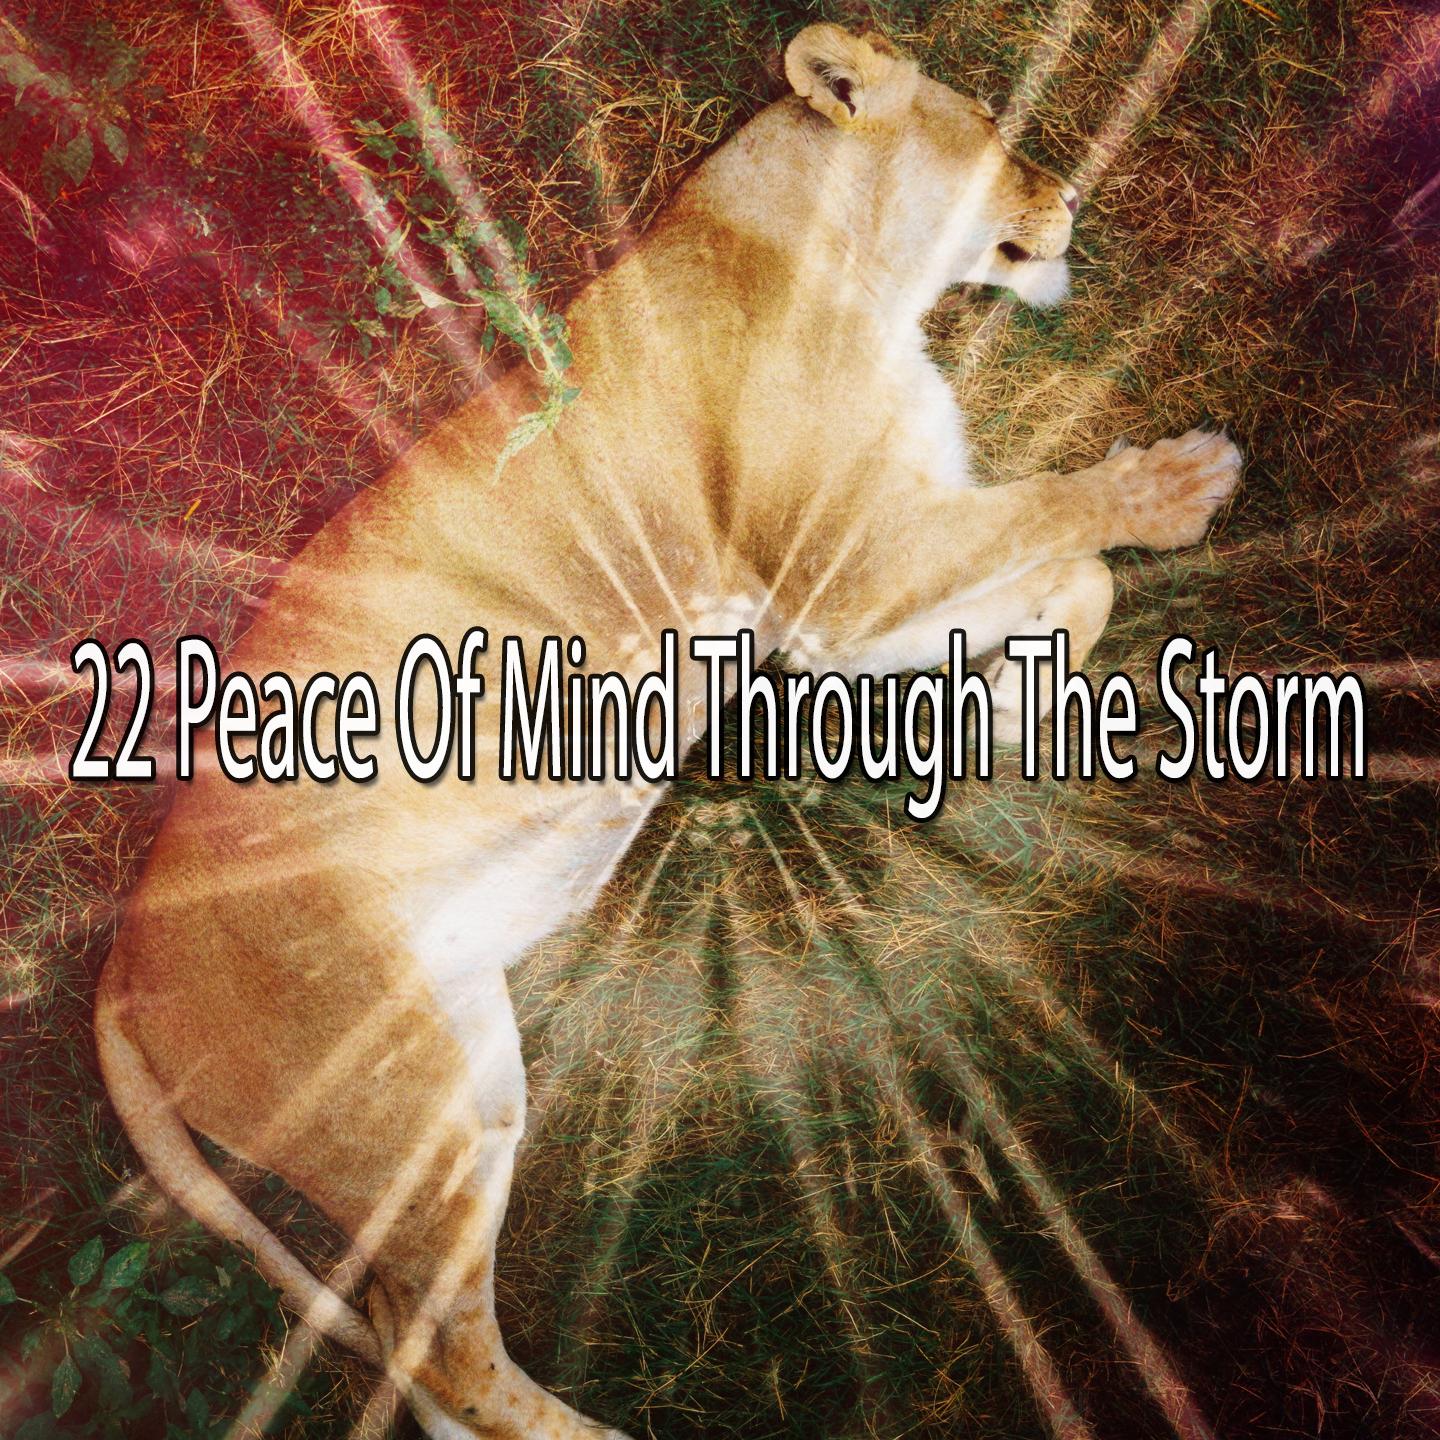 22 Peace of Mind Through the Storm